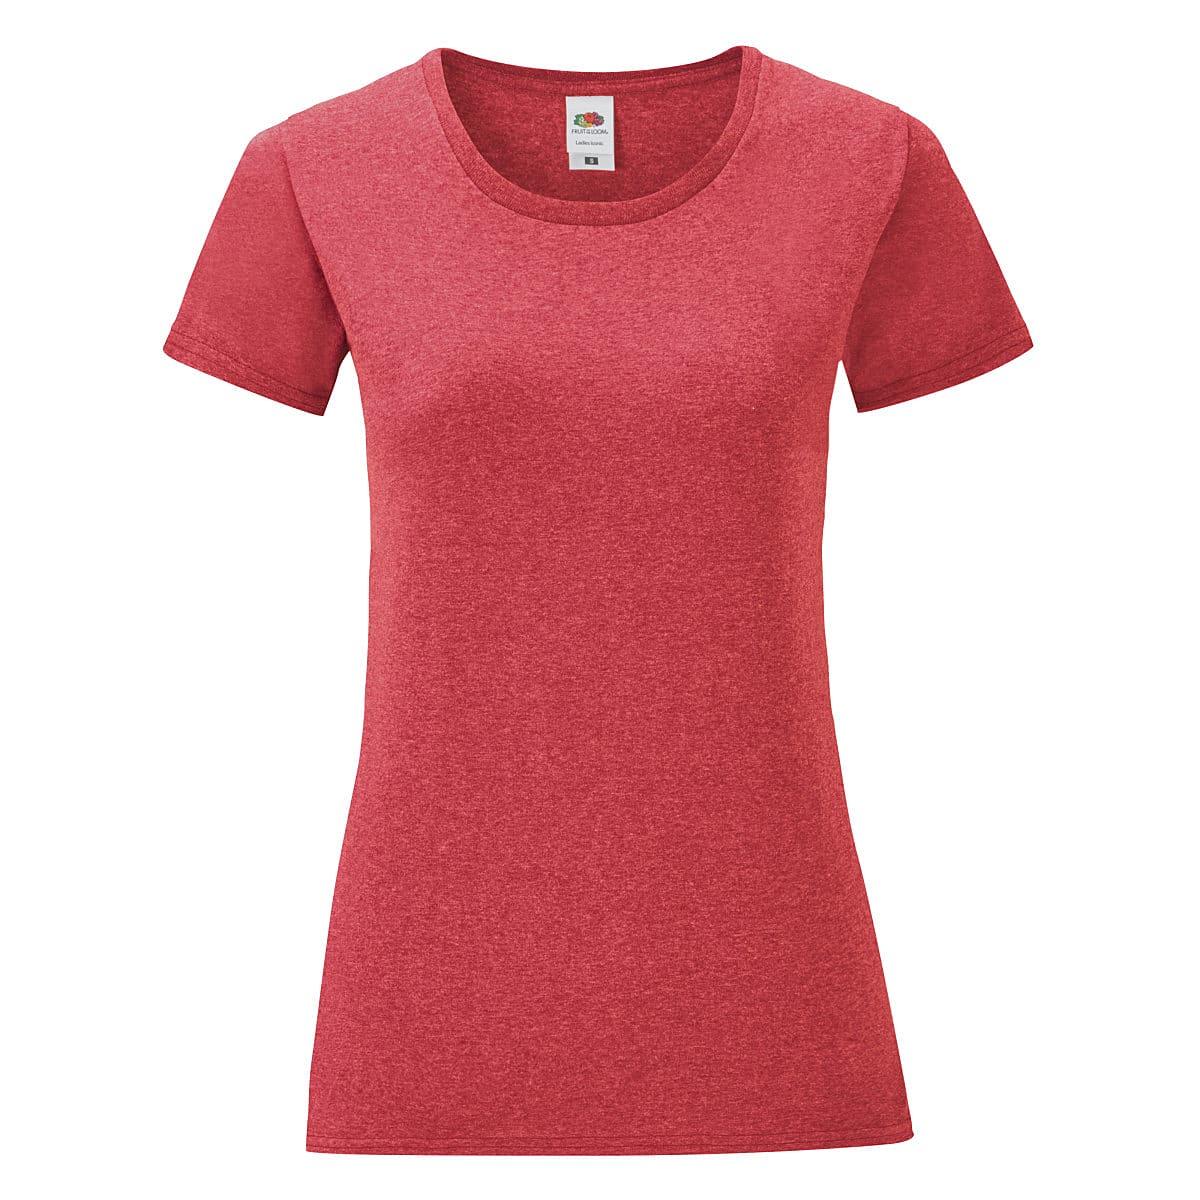 Fruit Of The Loom Womens Iconic T-Shirt in Vintage Heather Red (Product Code: 61432)